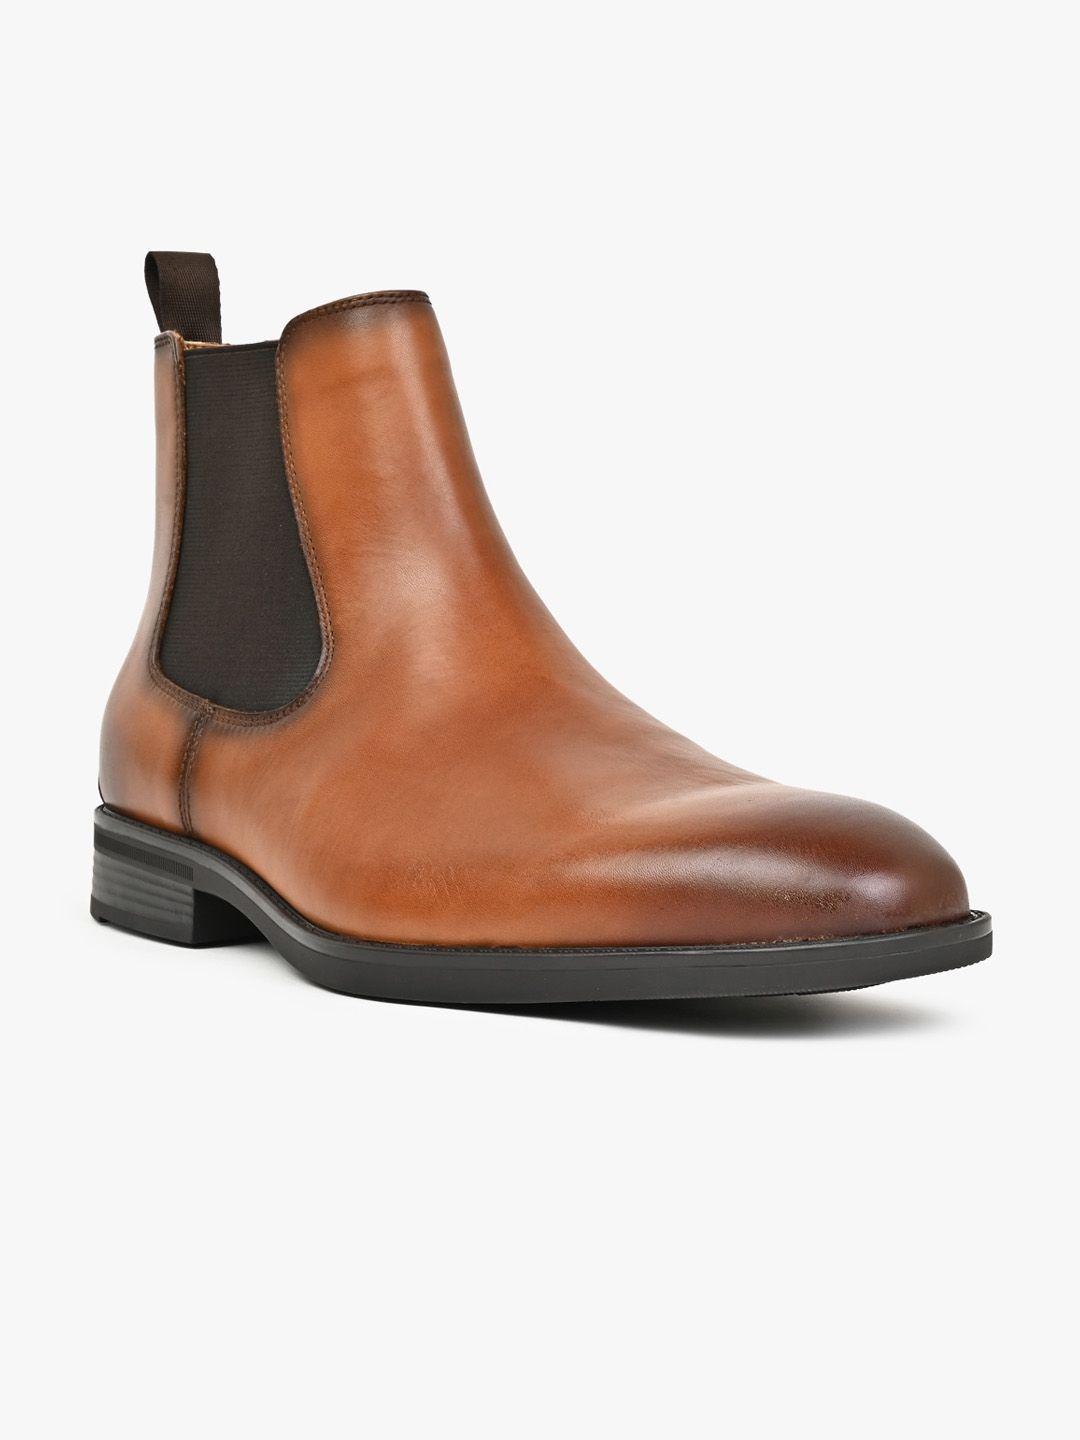 aldo men chambers leather mid-top chelsea boots